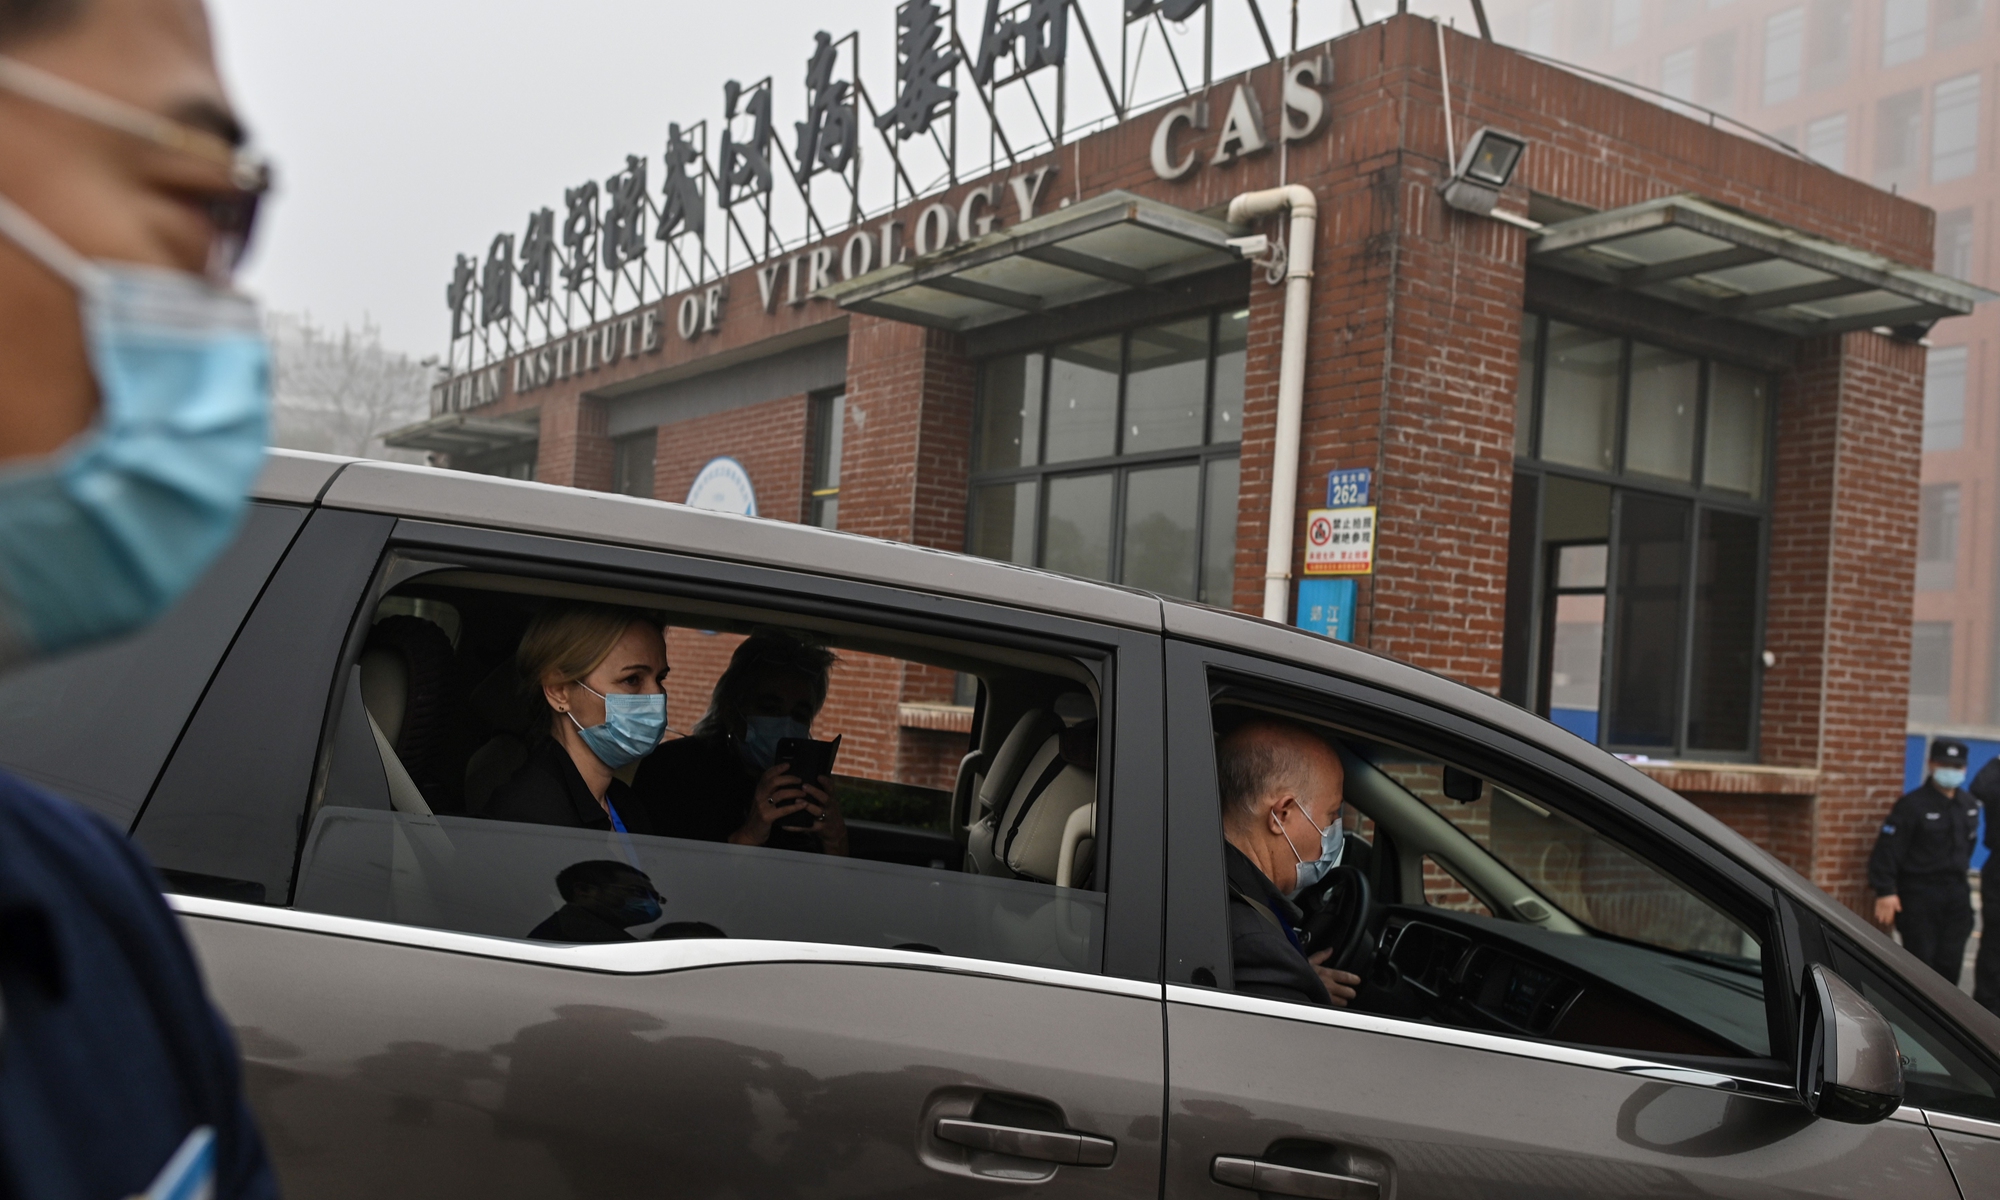 Peter Daszak (right) and other members of the World Health Organization (WHO) team investigating the origins of the COVID-19 arrive at the Wuhan Institute of Virology in Wuhan, Hubei Province on Wednesday. Photo: AFP